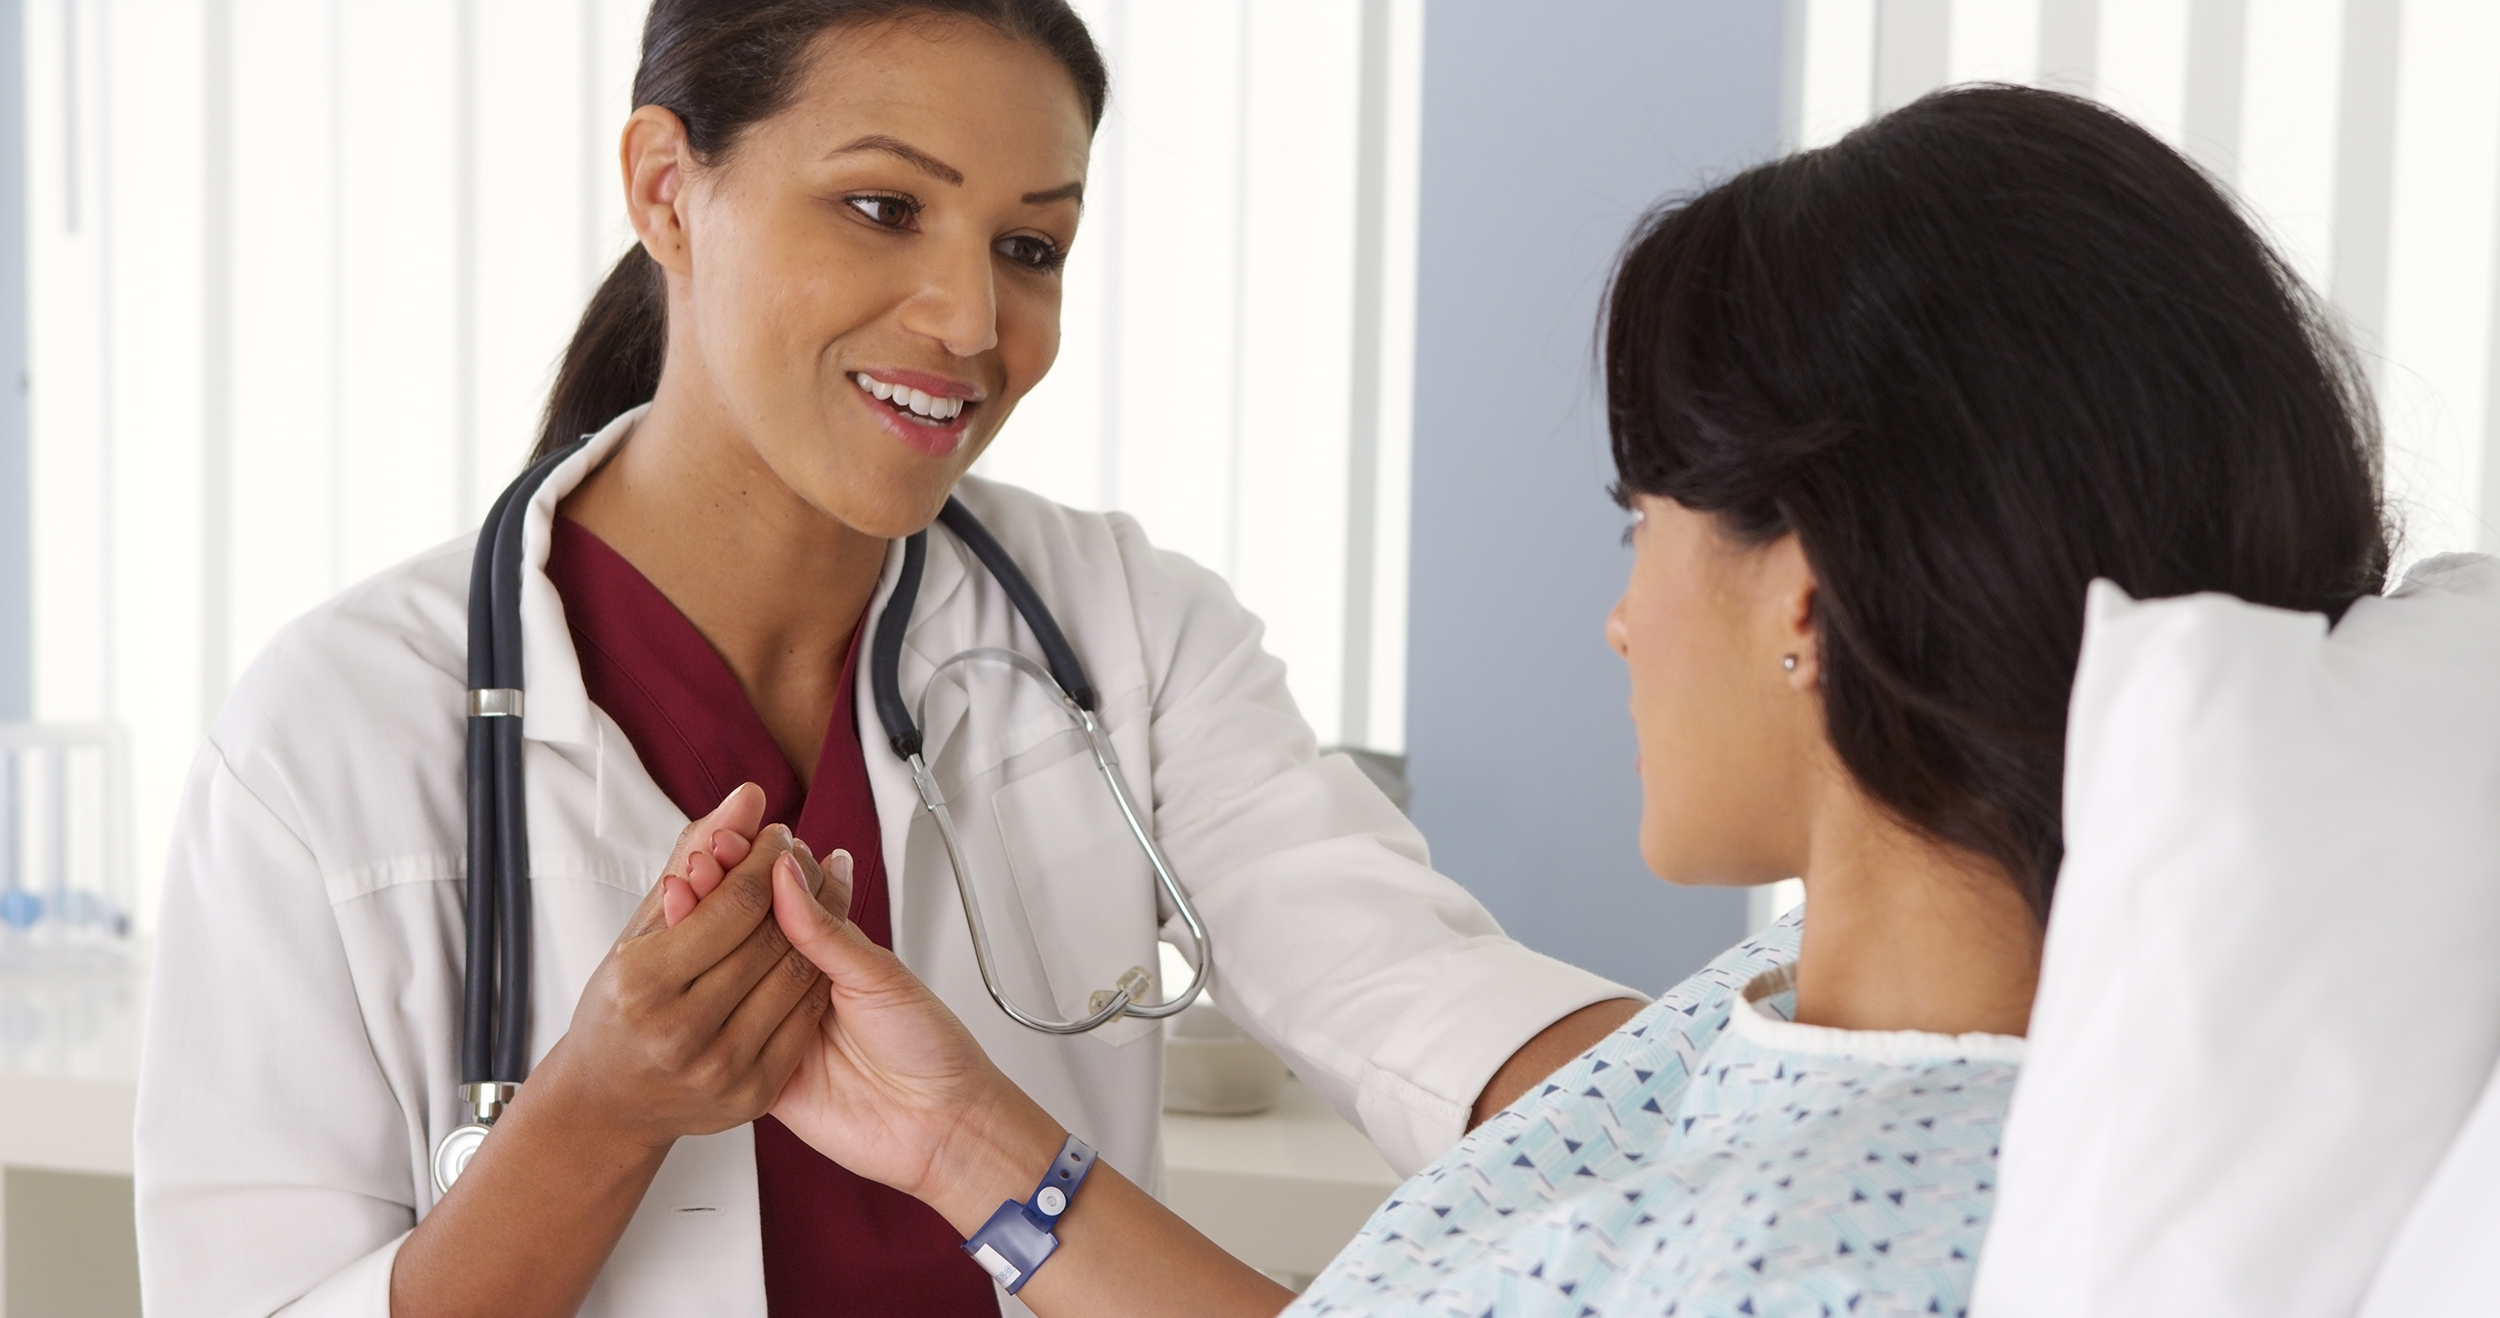 How Informed Are You With Healthcare Marketing To The Hispanic Market?